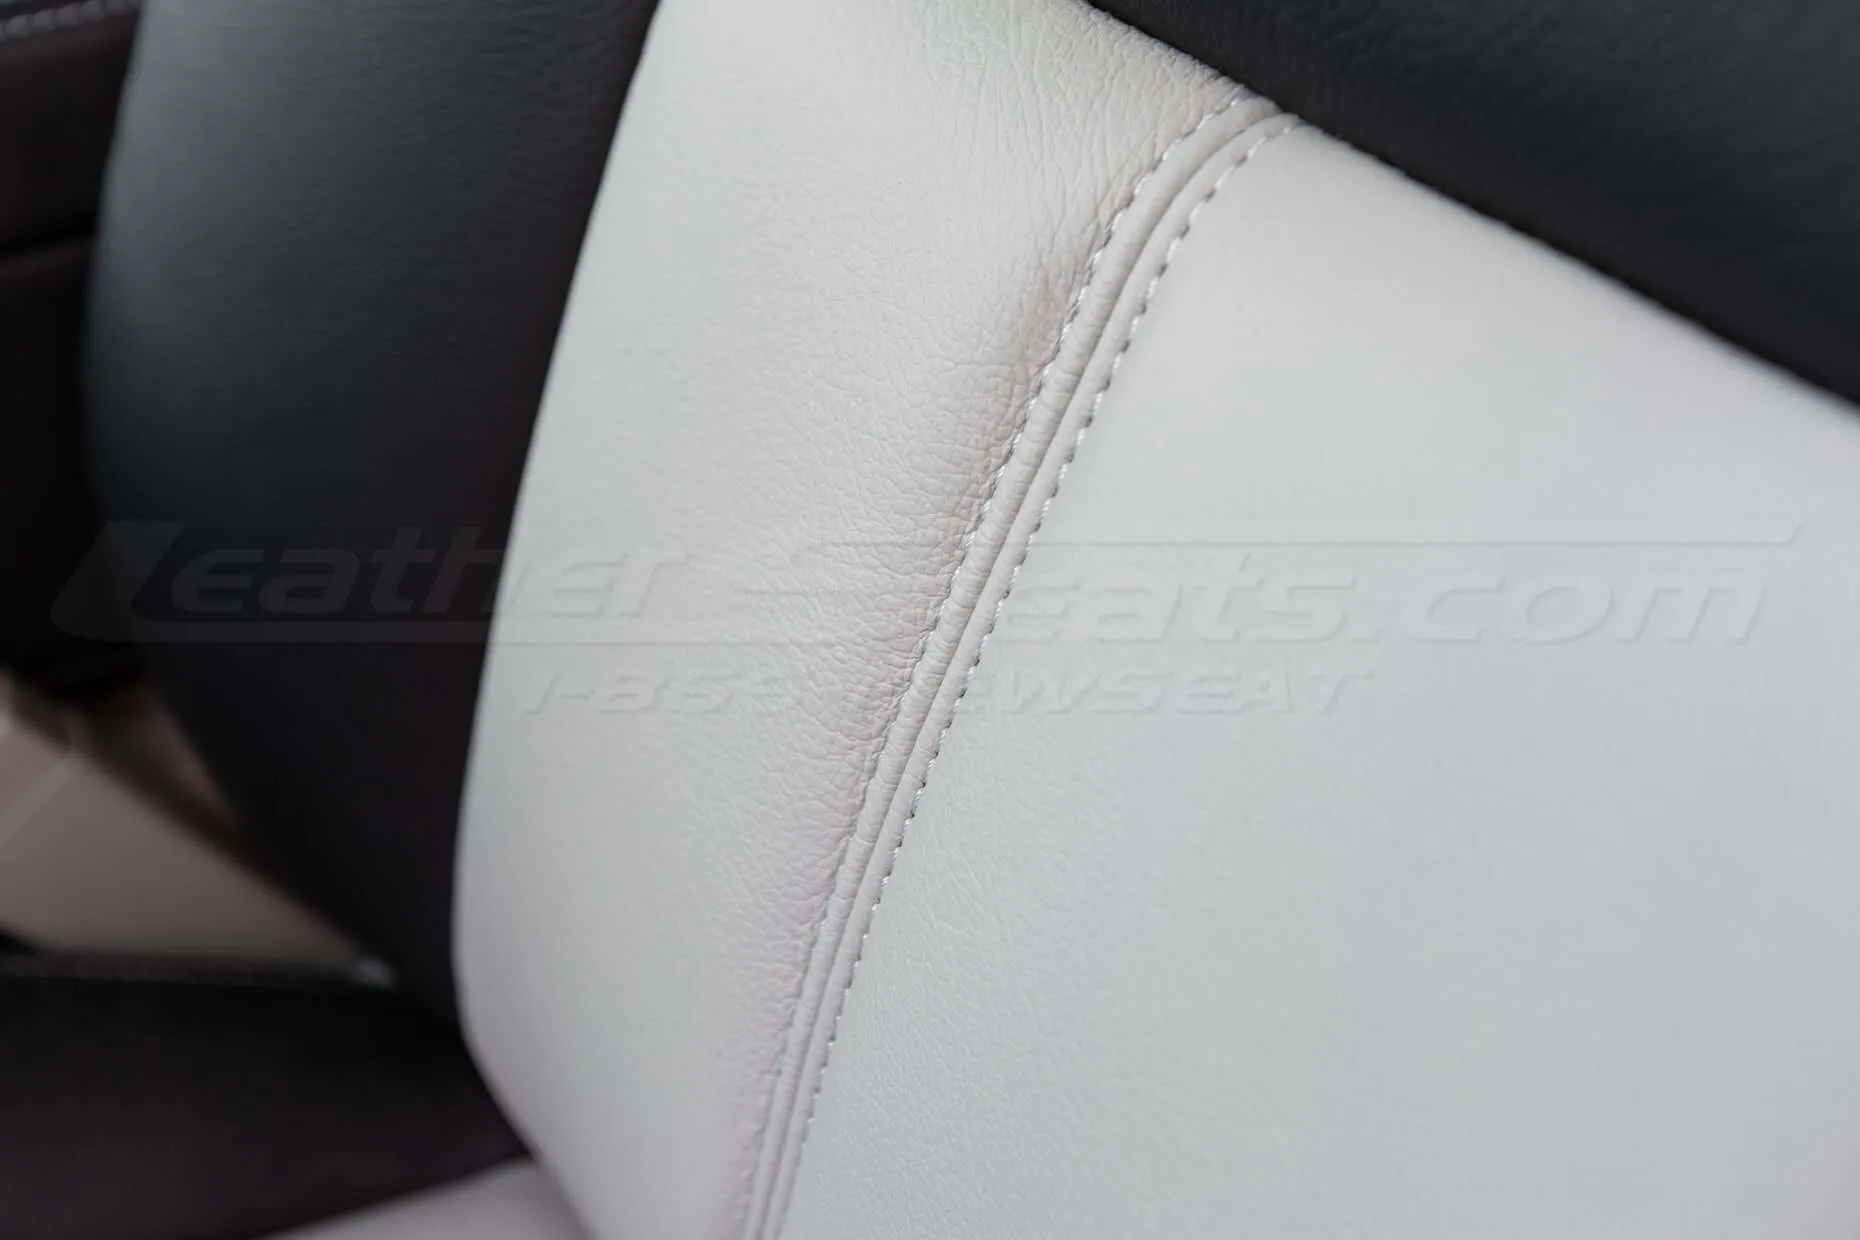 2003-2007 Chevrolet Silverado Upholstery Kit - Black & Dove Grey - Installed - Insert double-stitching close-up